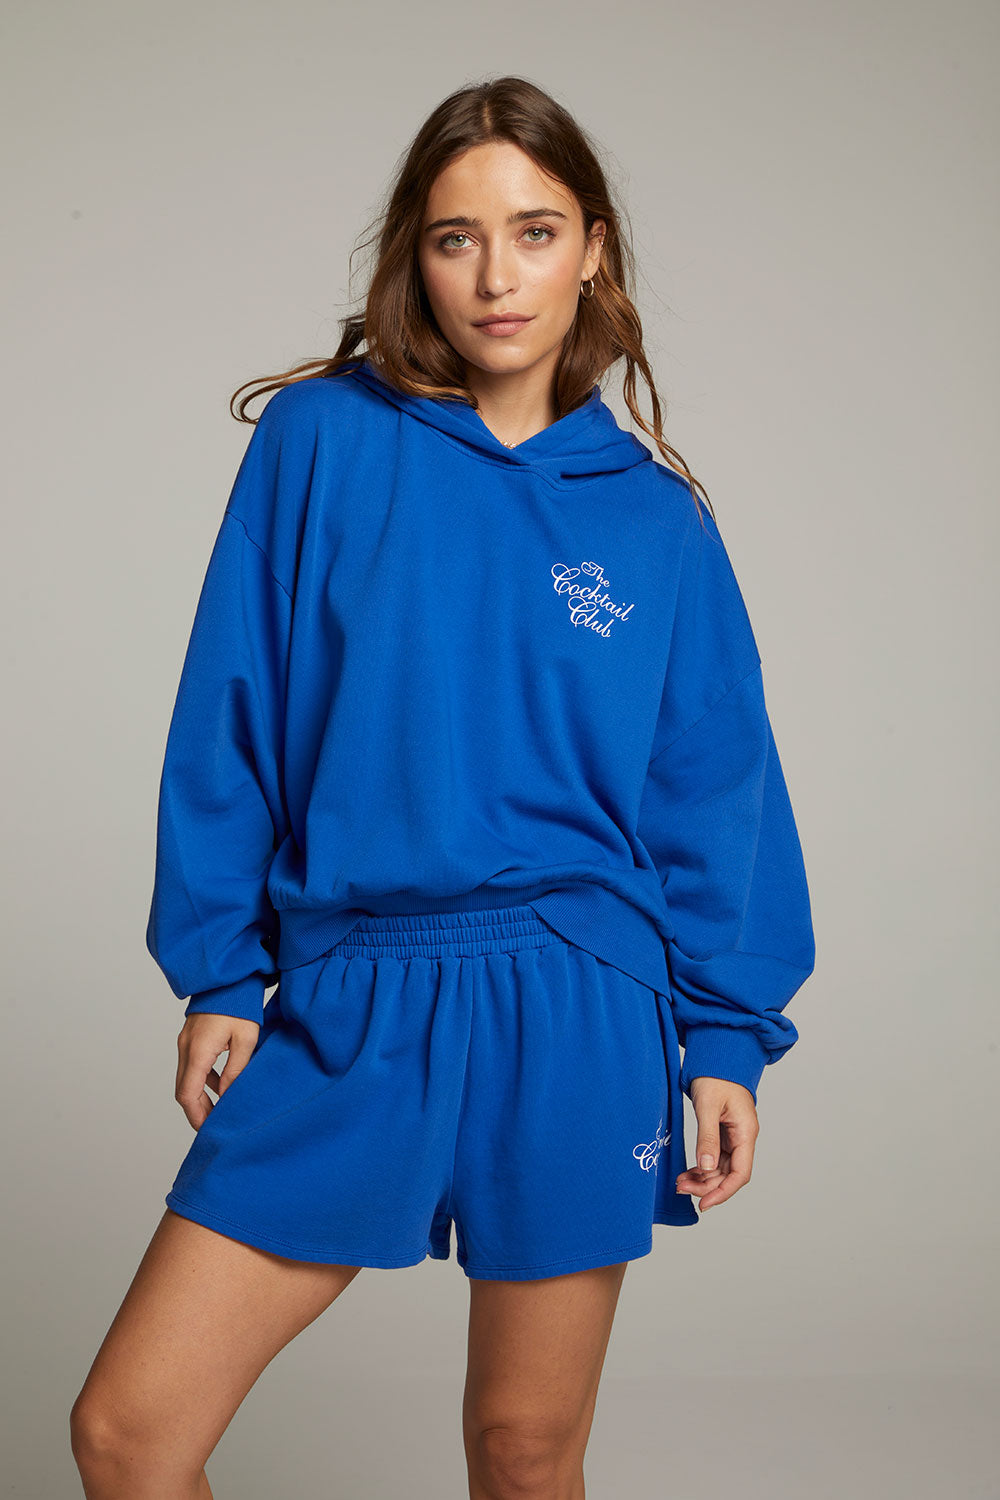 The Cocktail Club Pullover Hoodie WOMENS chaserbrand